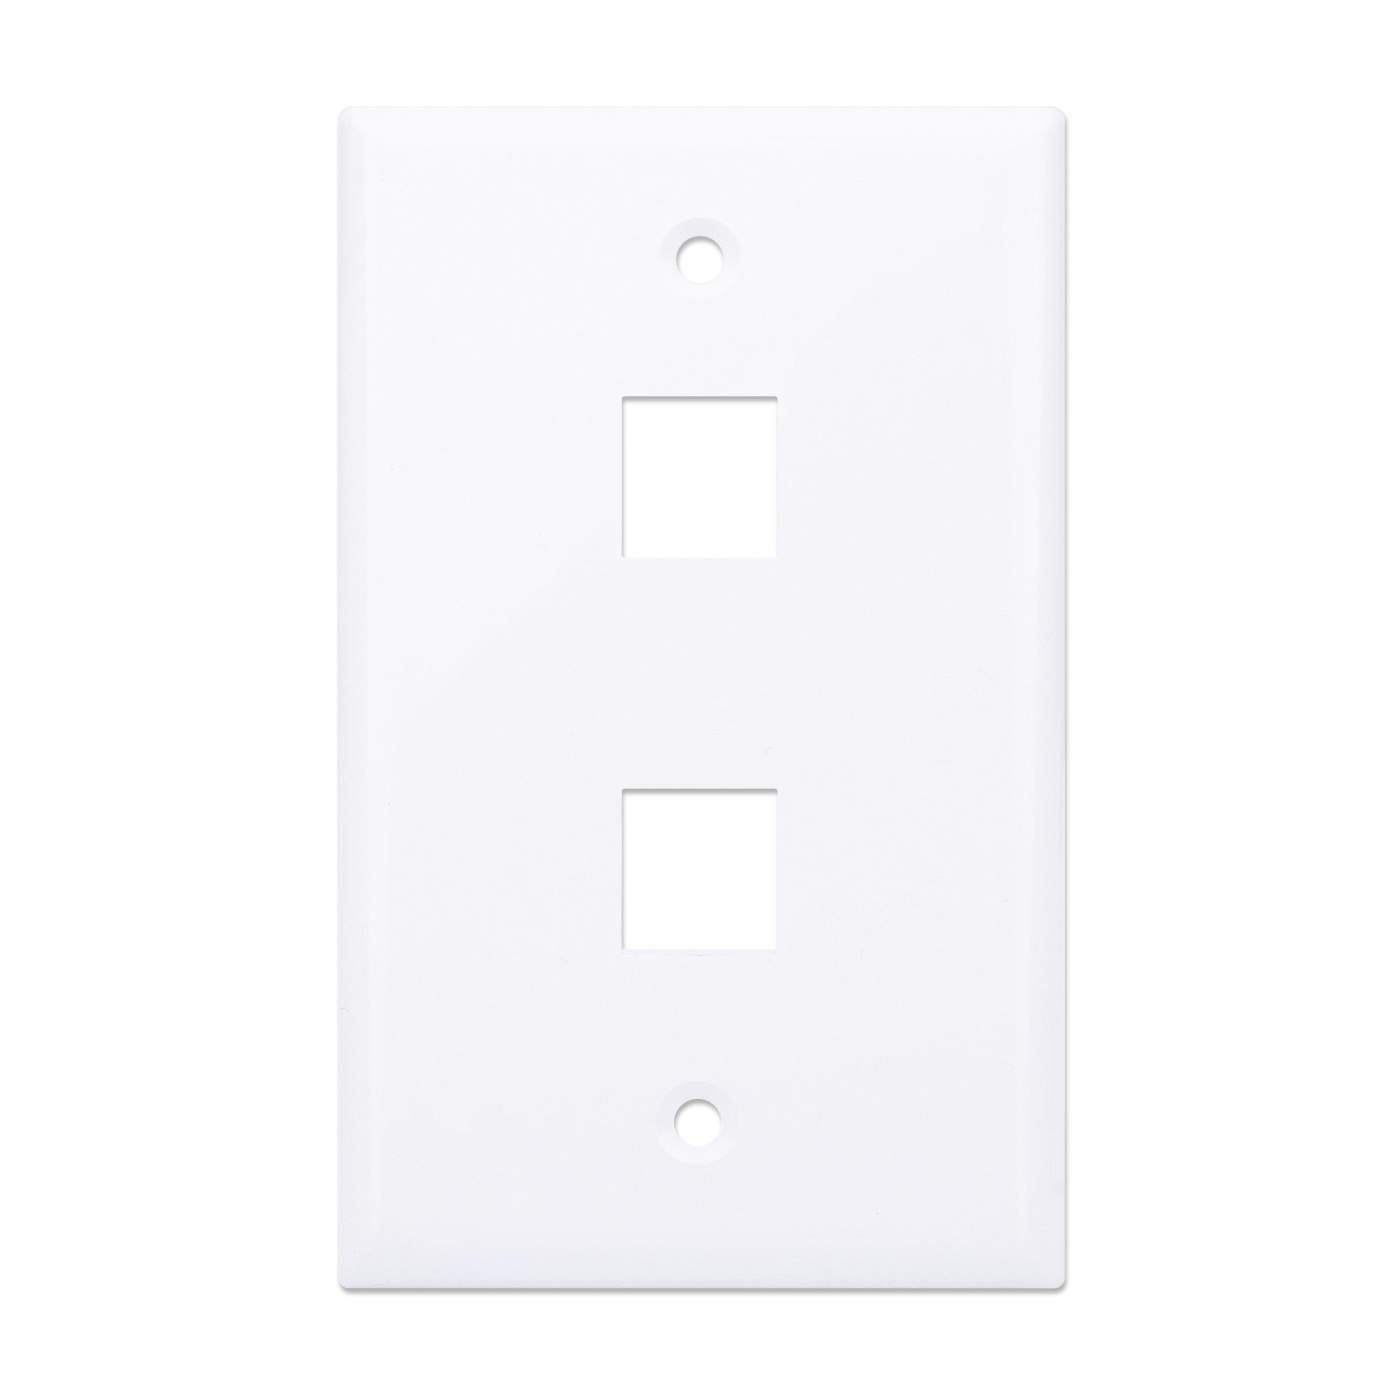 2-Outlet Keystone Wall Plate Image 4